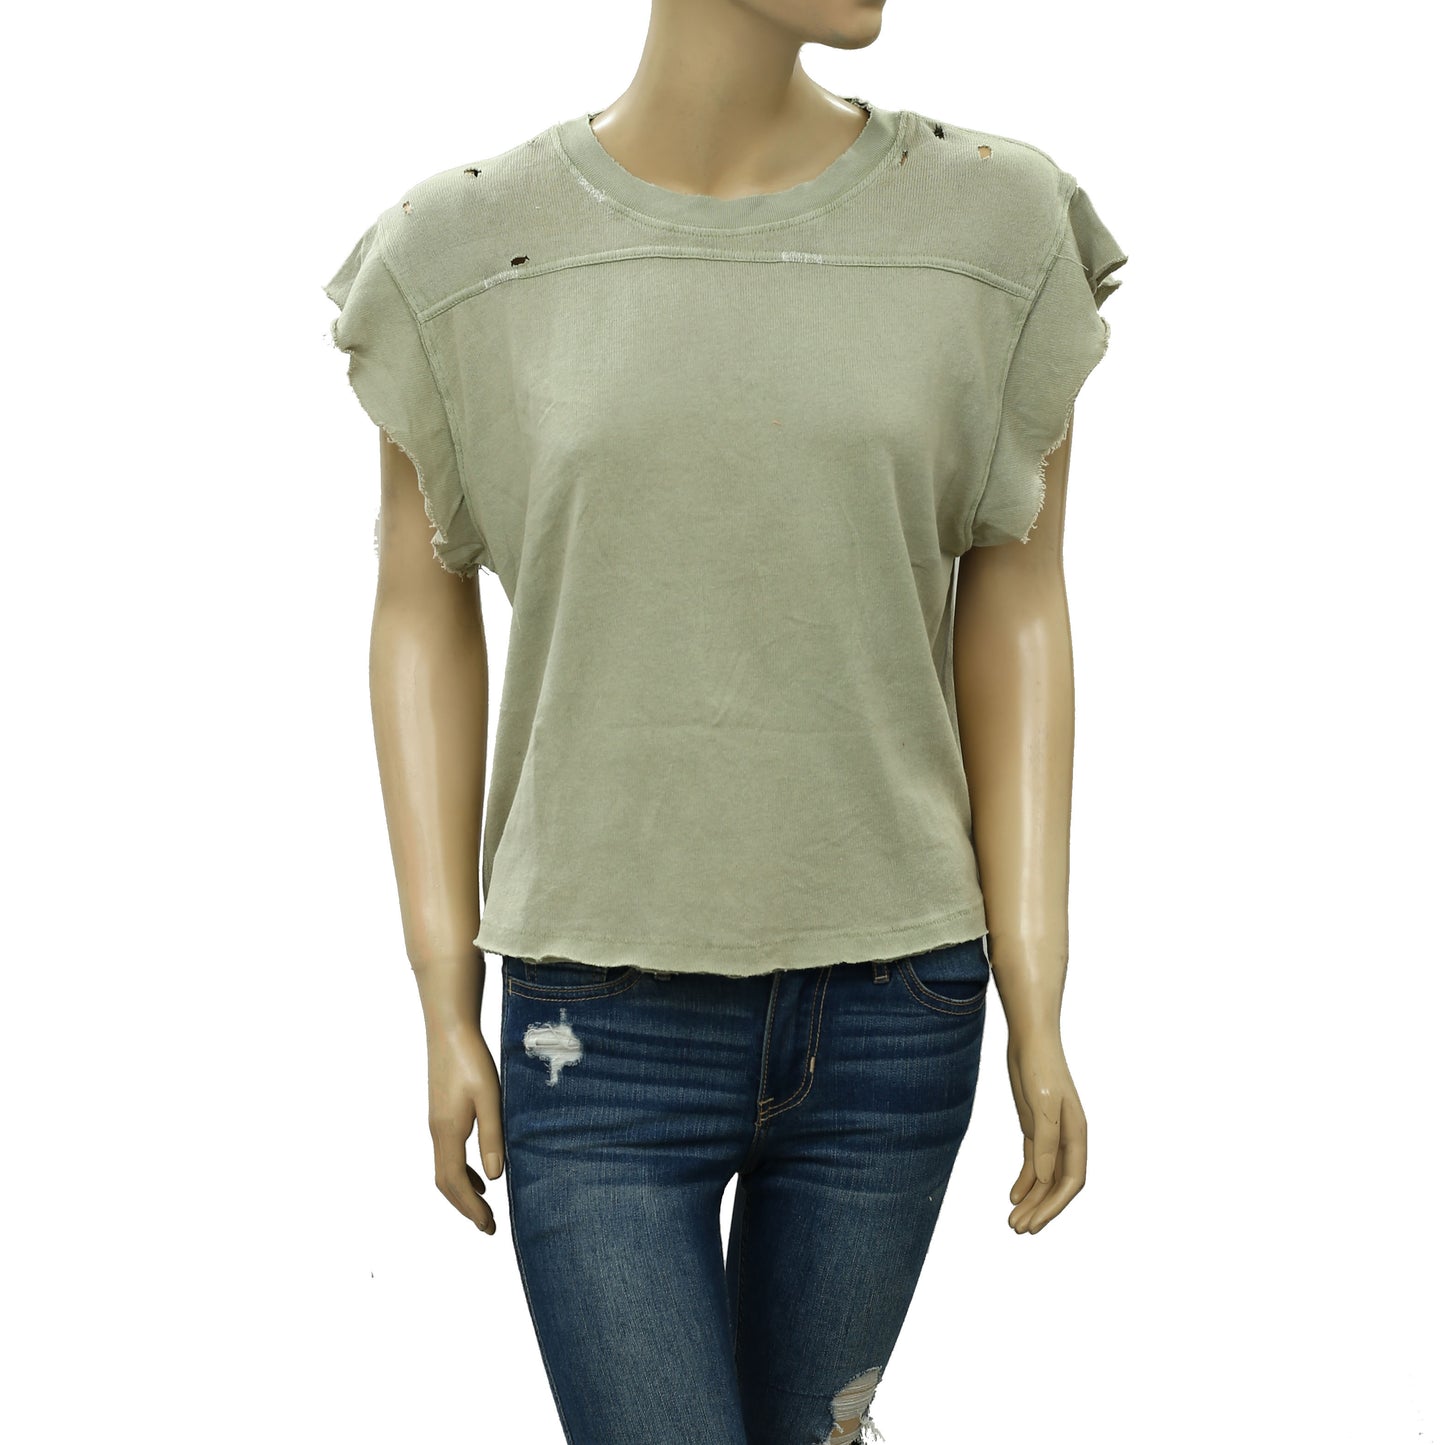 Free People We The Free Warrior Tee Blouse Top